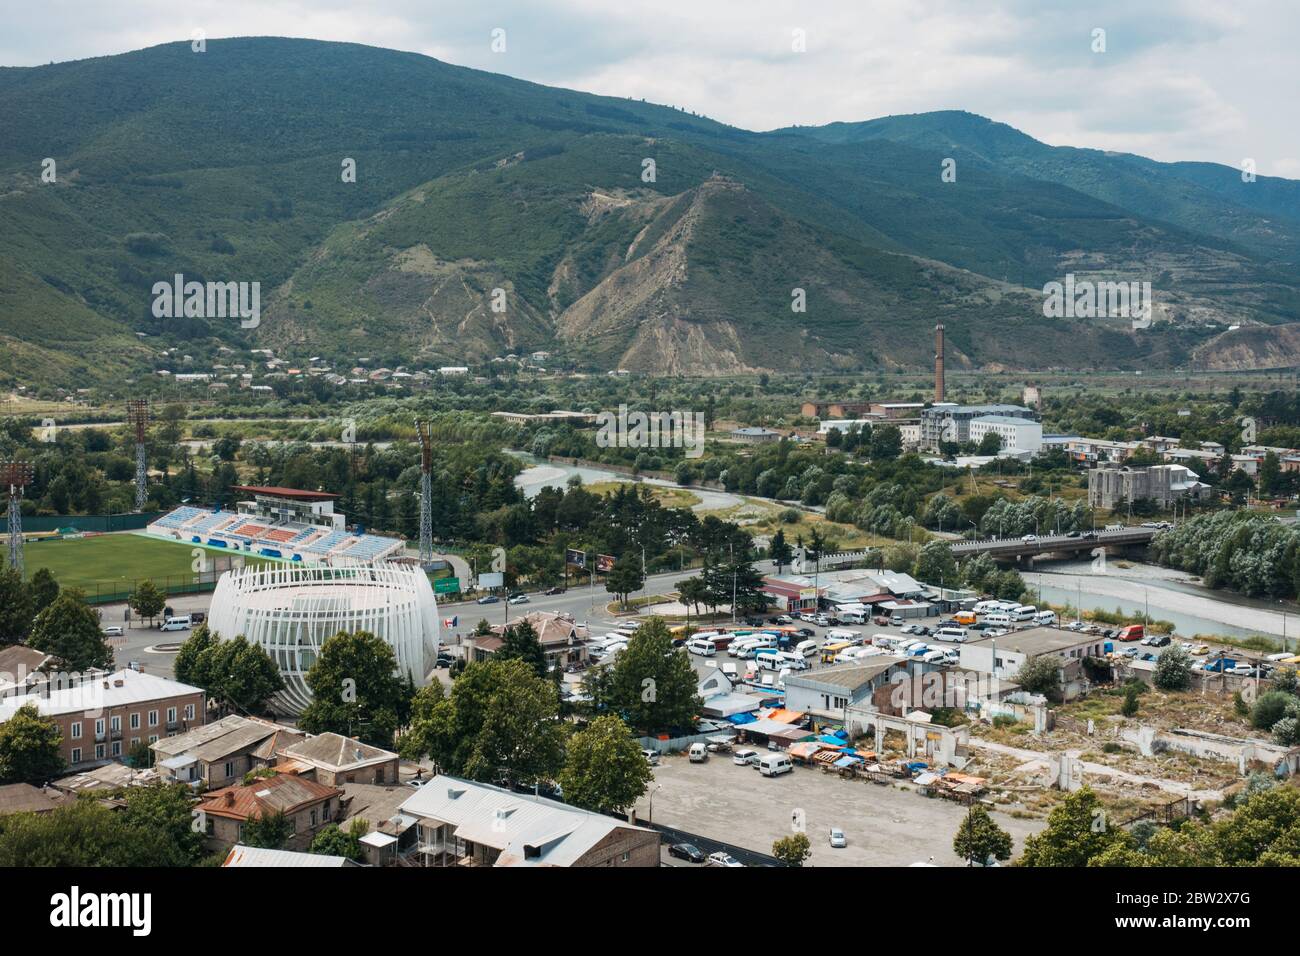 Looking out over the city of Gori, in eastern Georgia. The circular structure bottom left is the Gori Public Service Hall Stock Photo